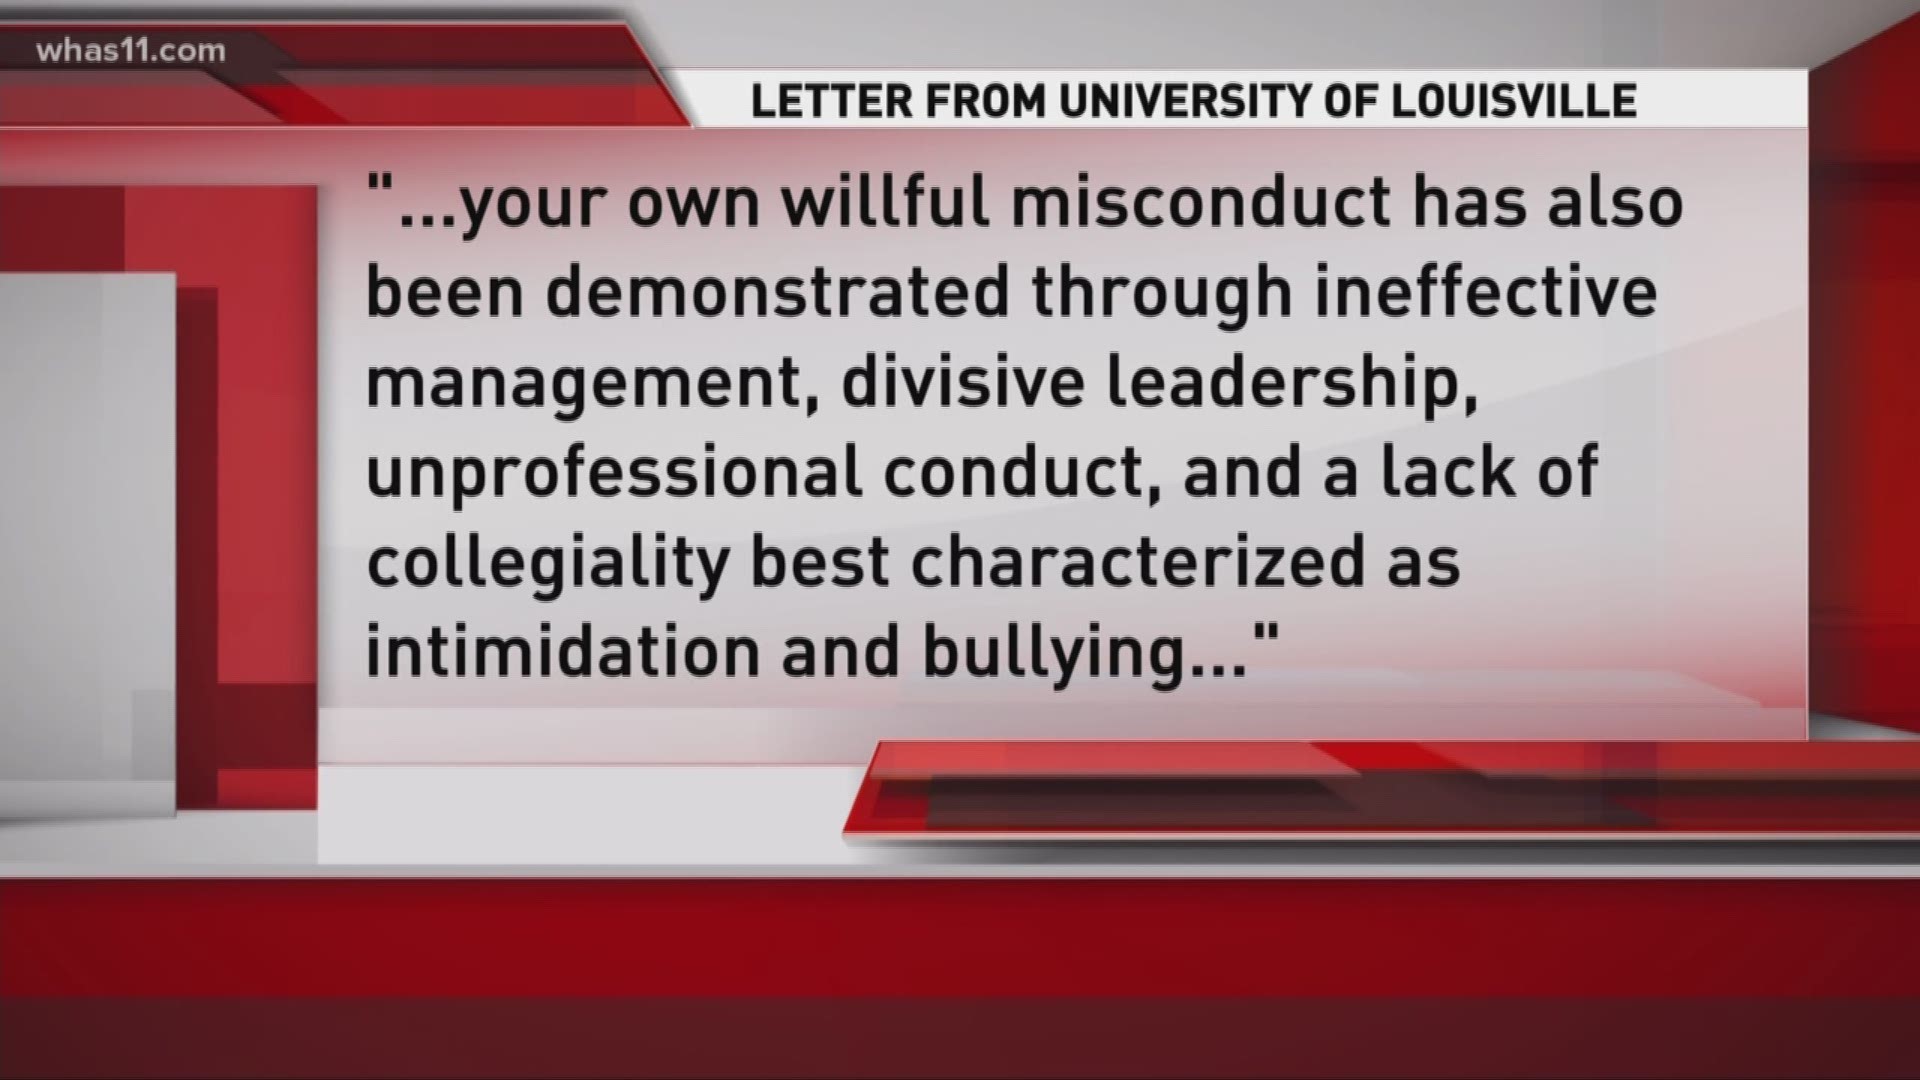 Pitino responds to letter from U of L